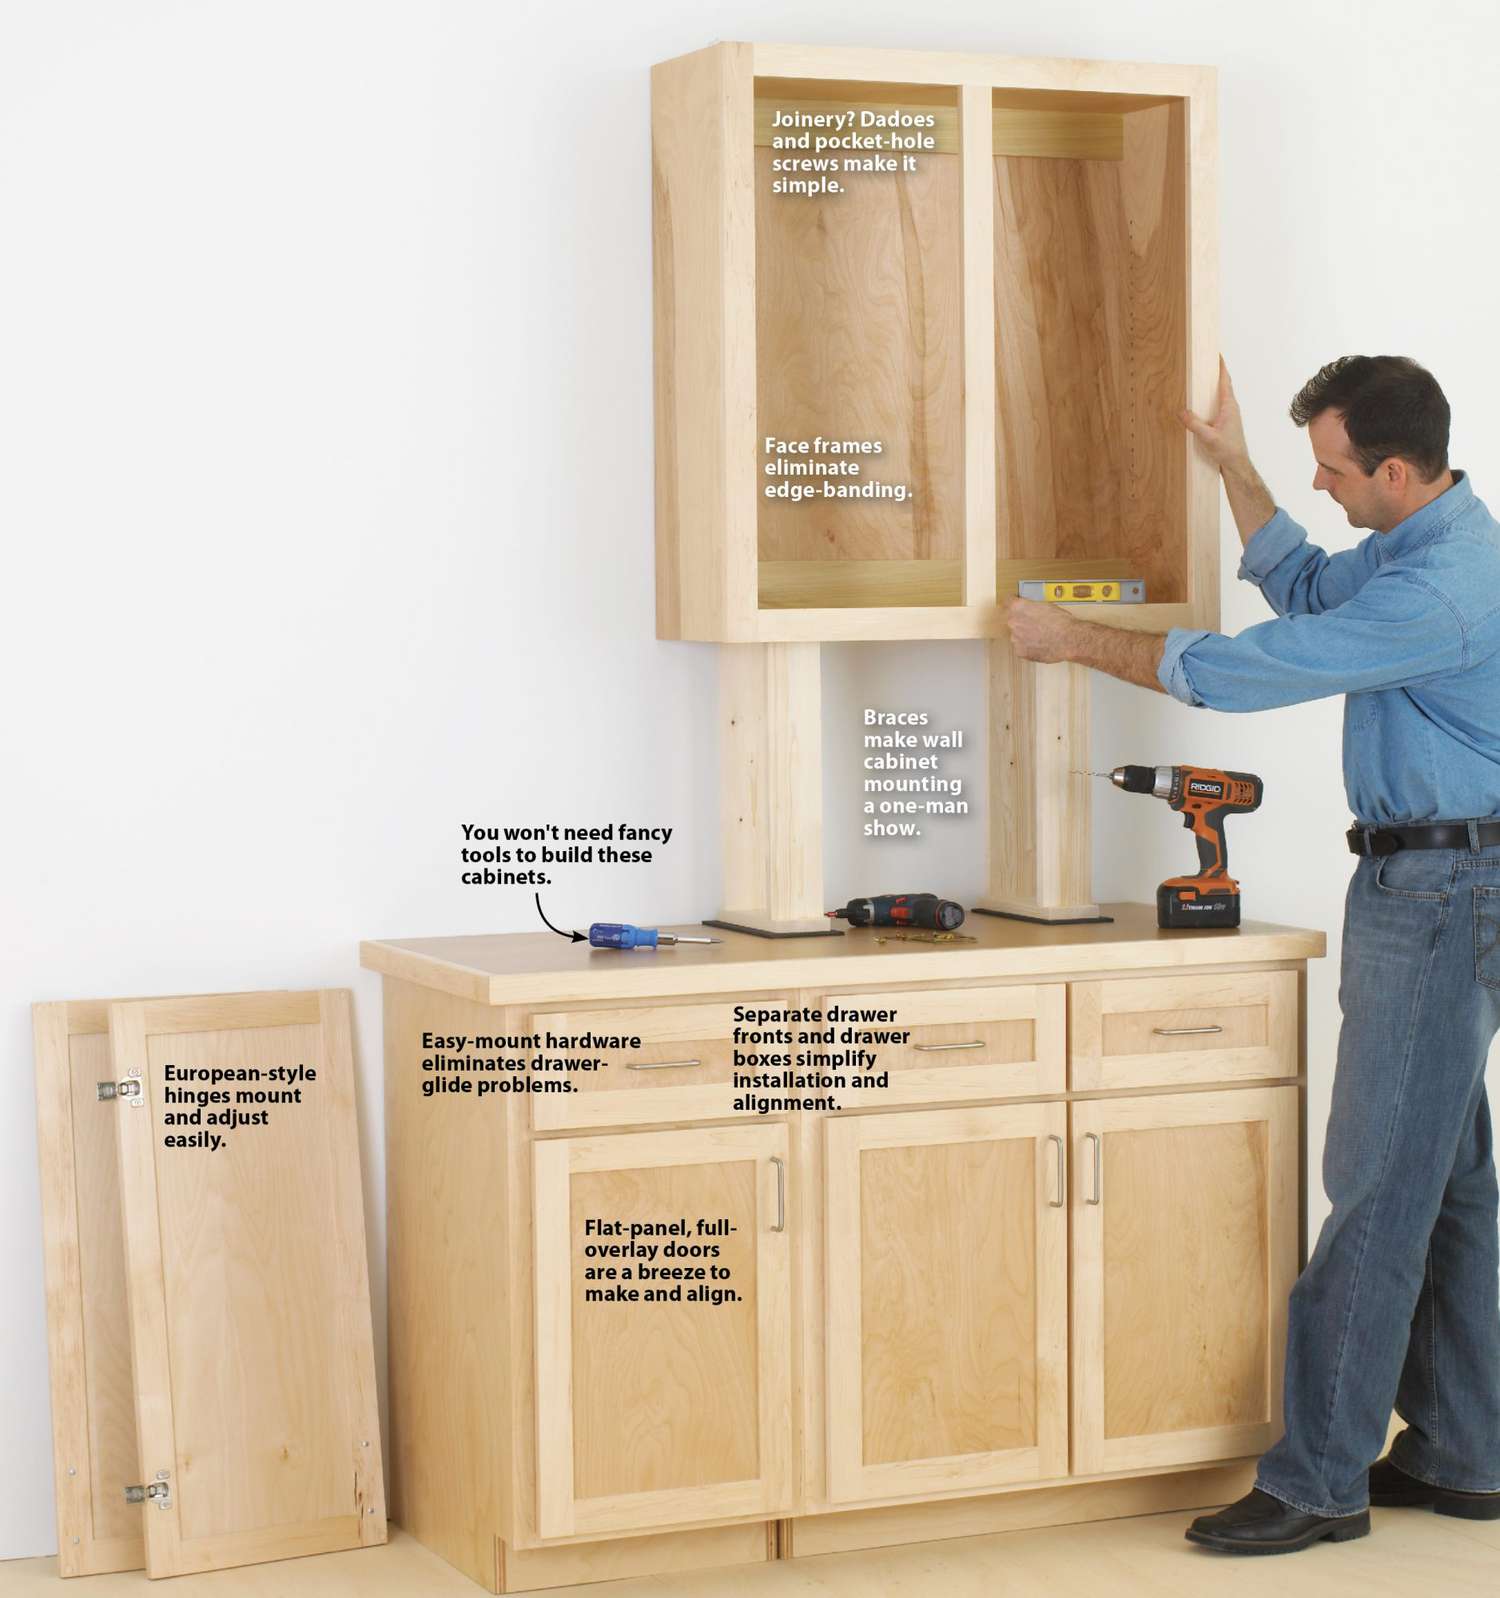 Make Cabinets the Easy Way